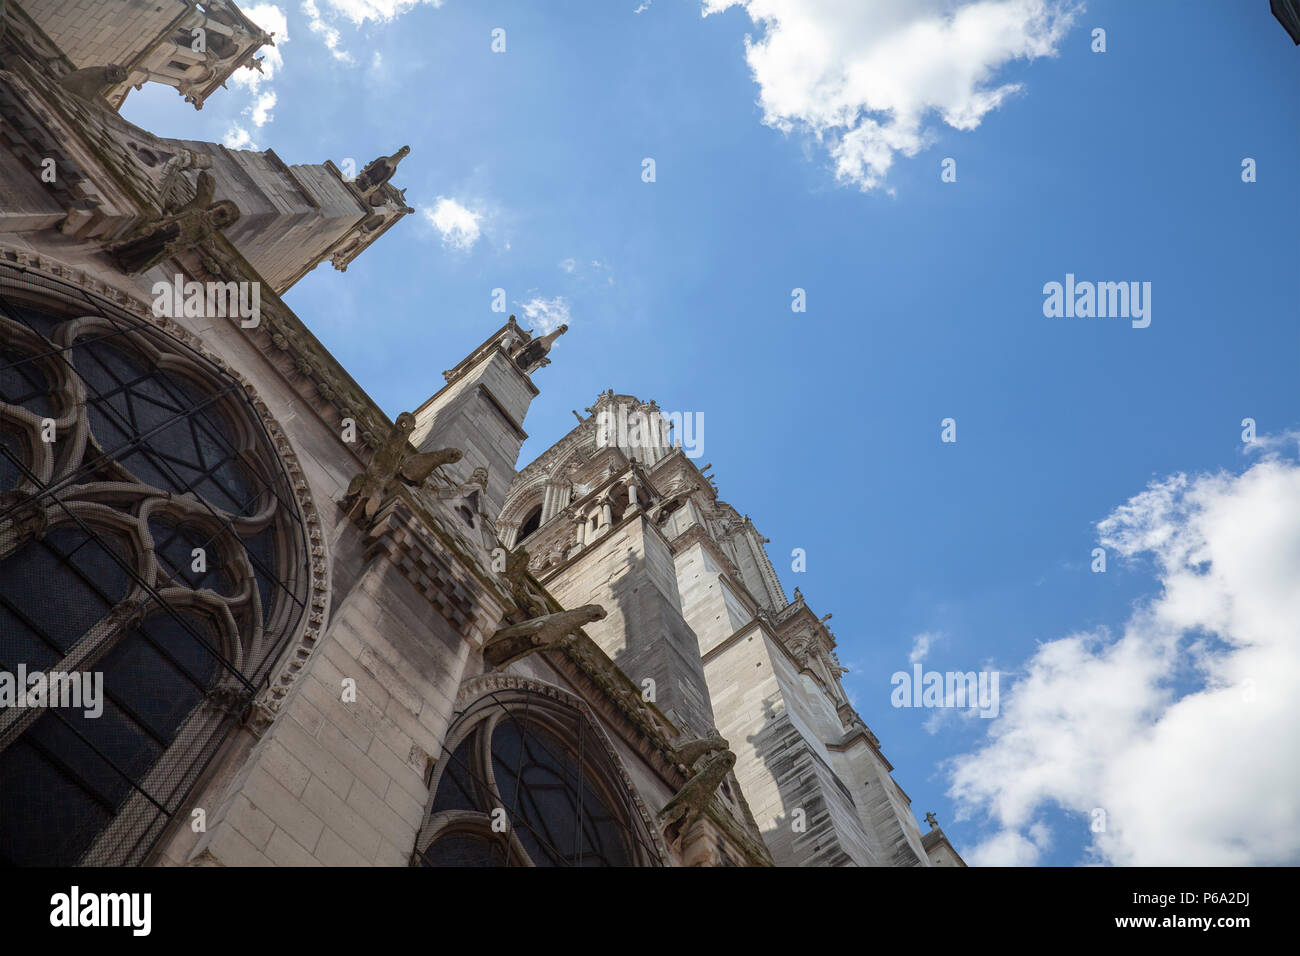 Notredame Cathedral in Paris, France Stock Photo